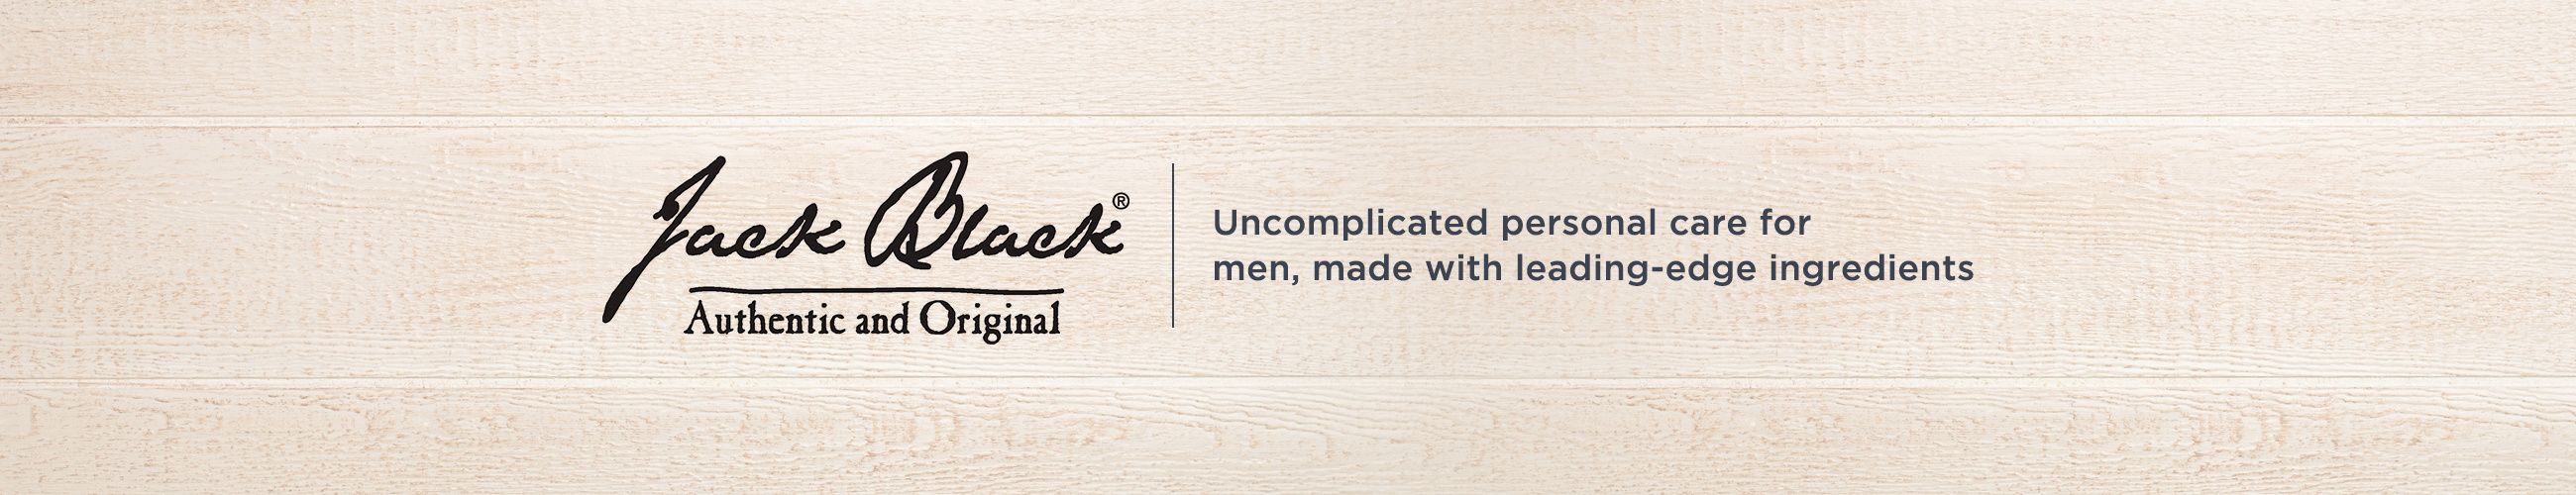 Jack Black Authentic and Original. Uncomplicated personal care for men, made with leading-edge ingredients